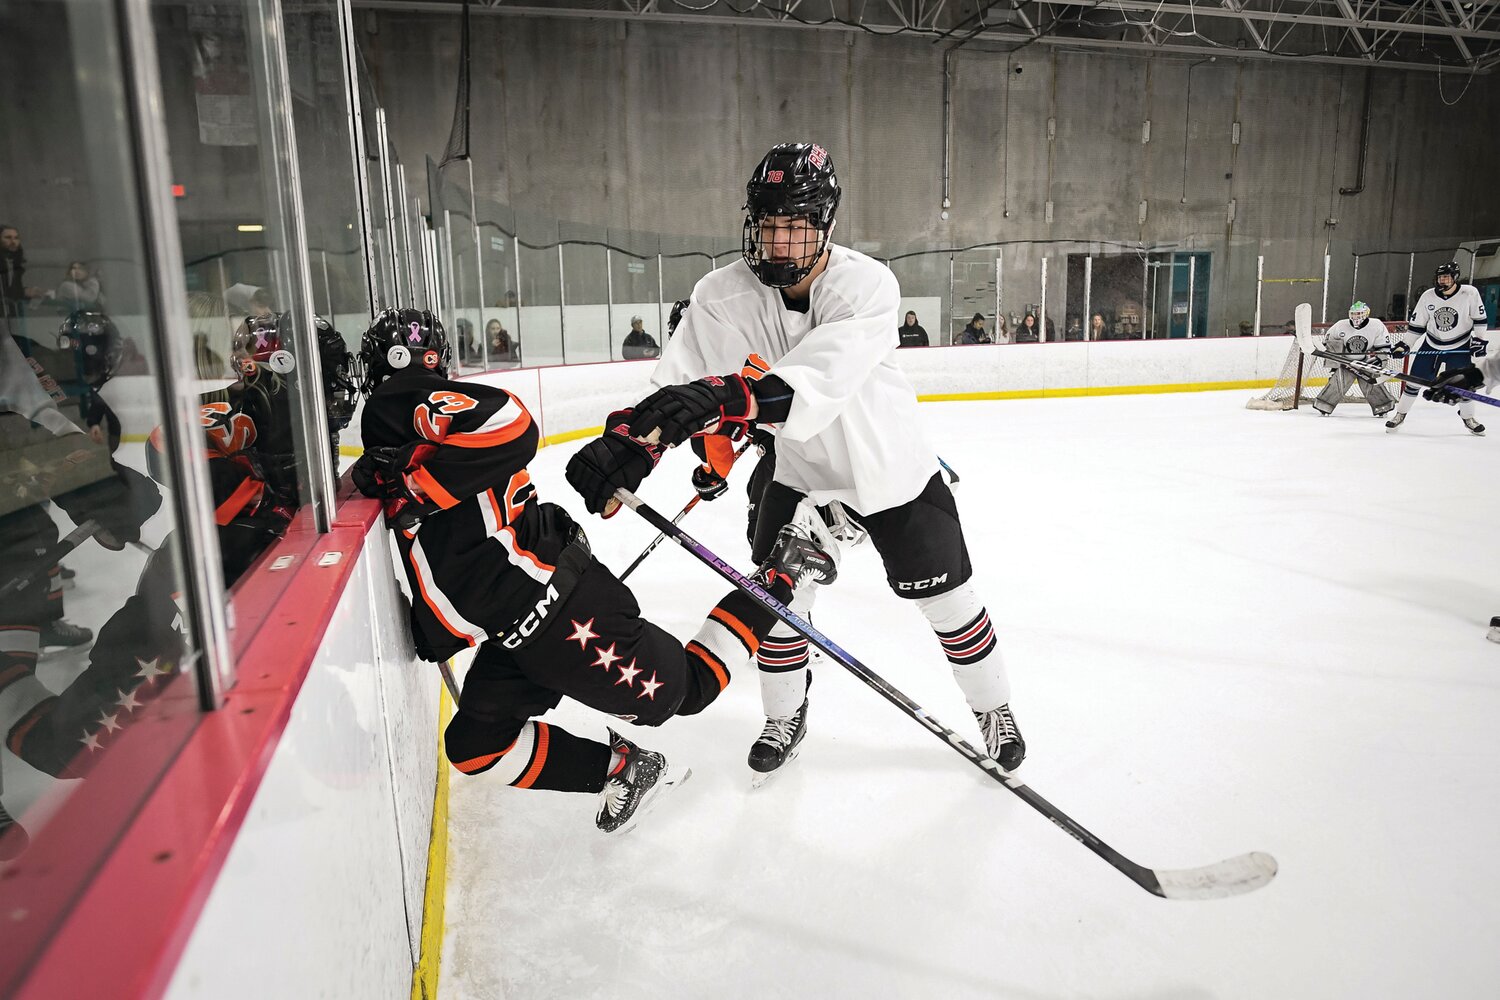 Council Rock North’s Jackson Accardi sends Pennsbury’s Jake Seiler into the boards with a heavy check in the first period.